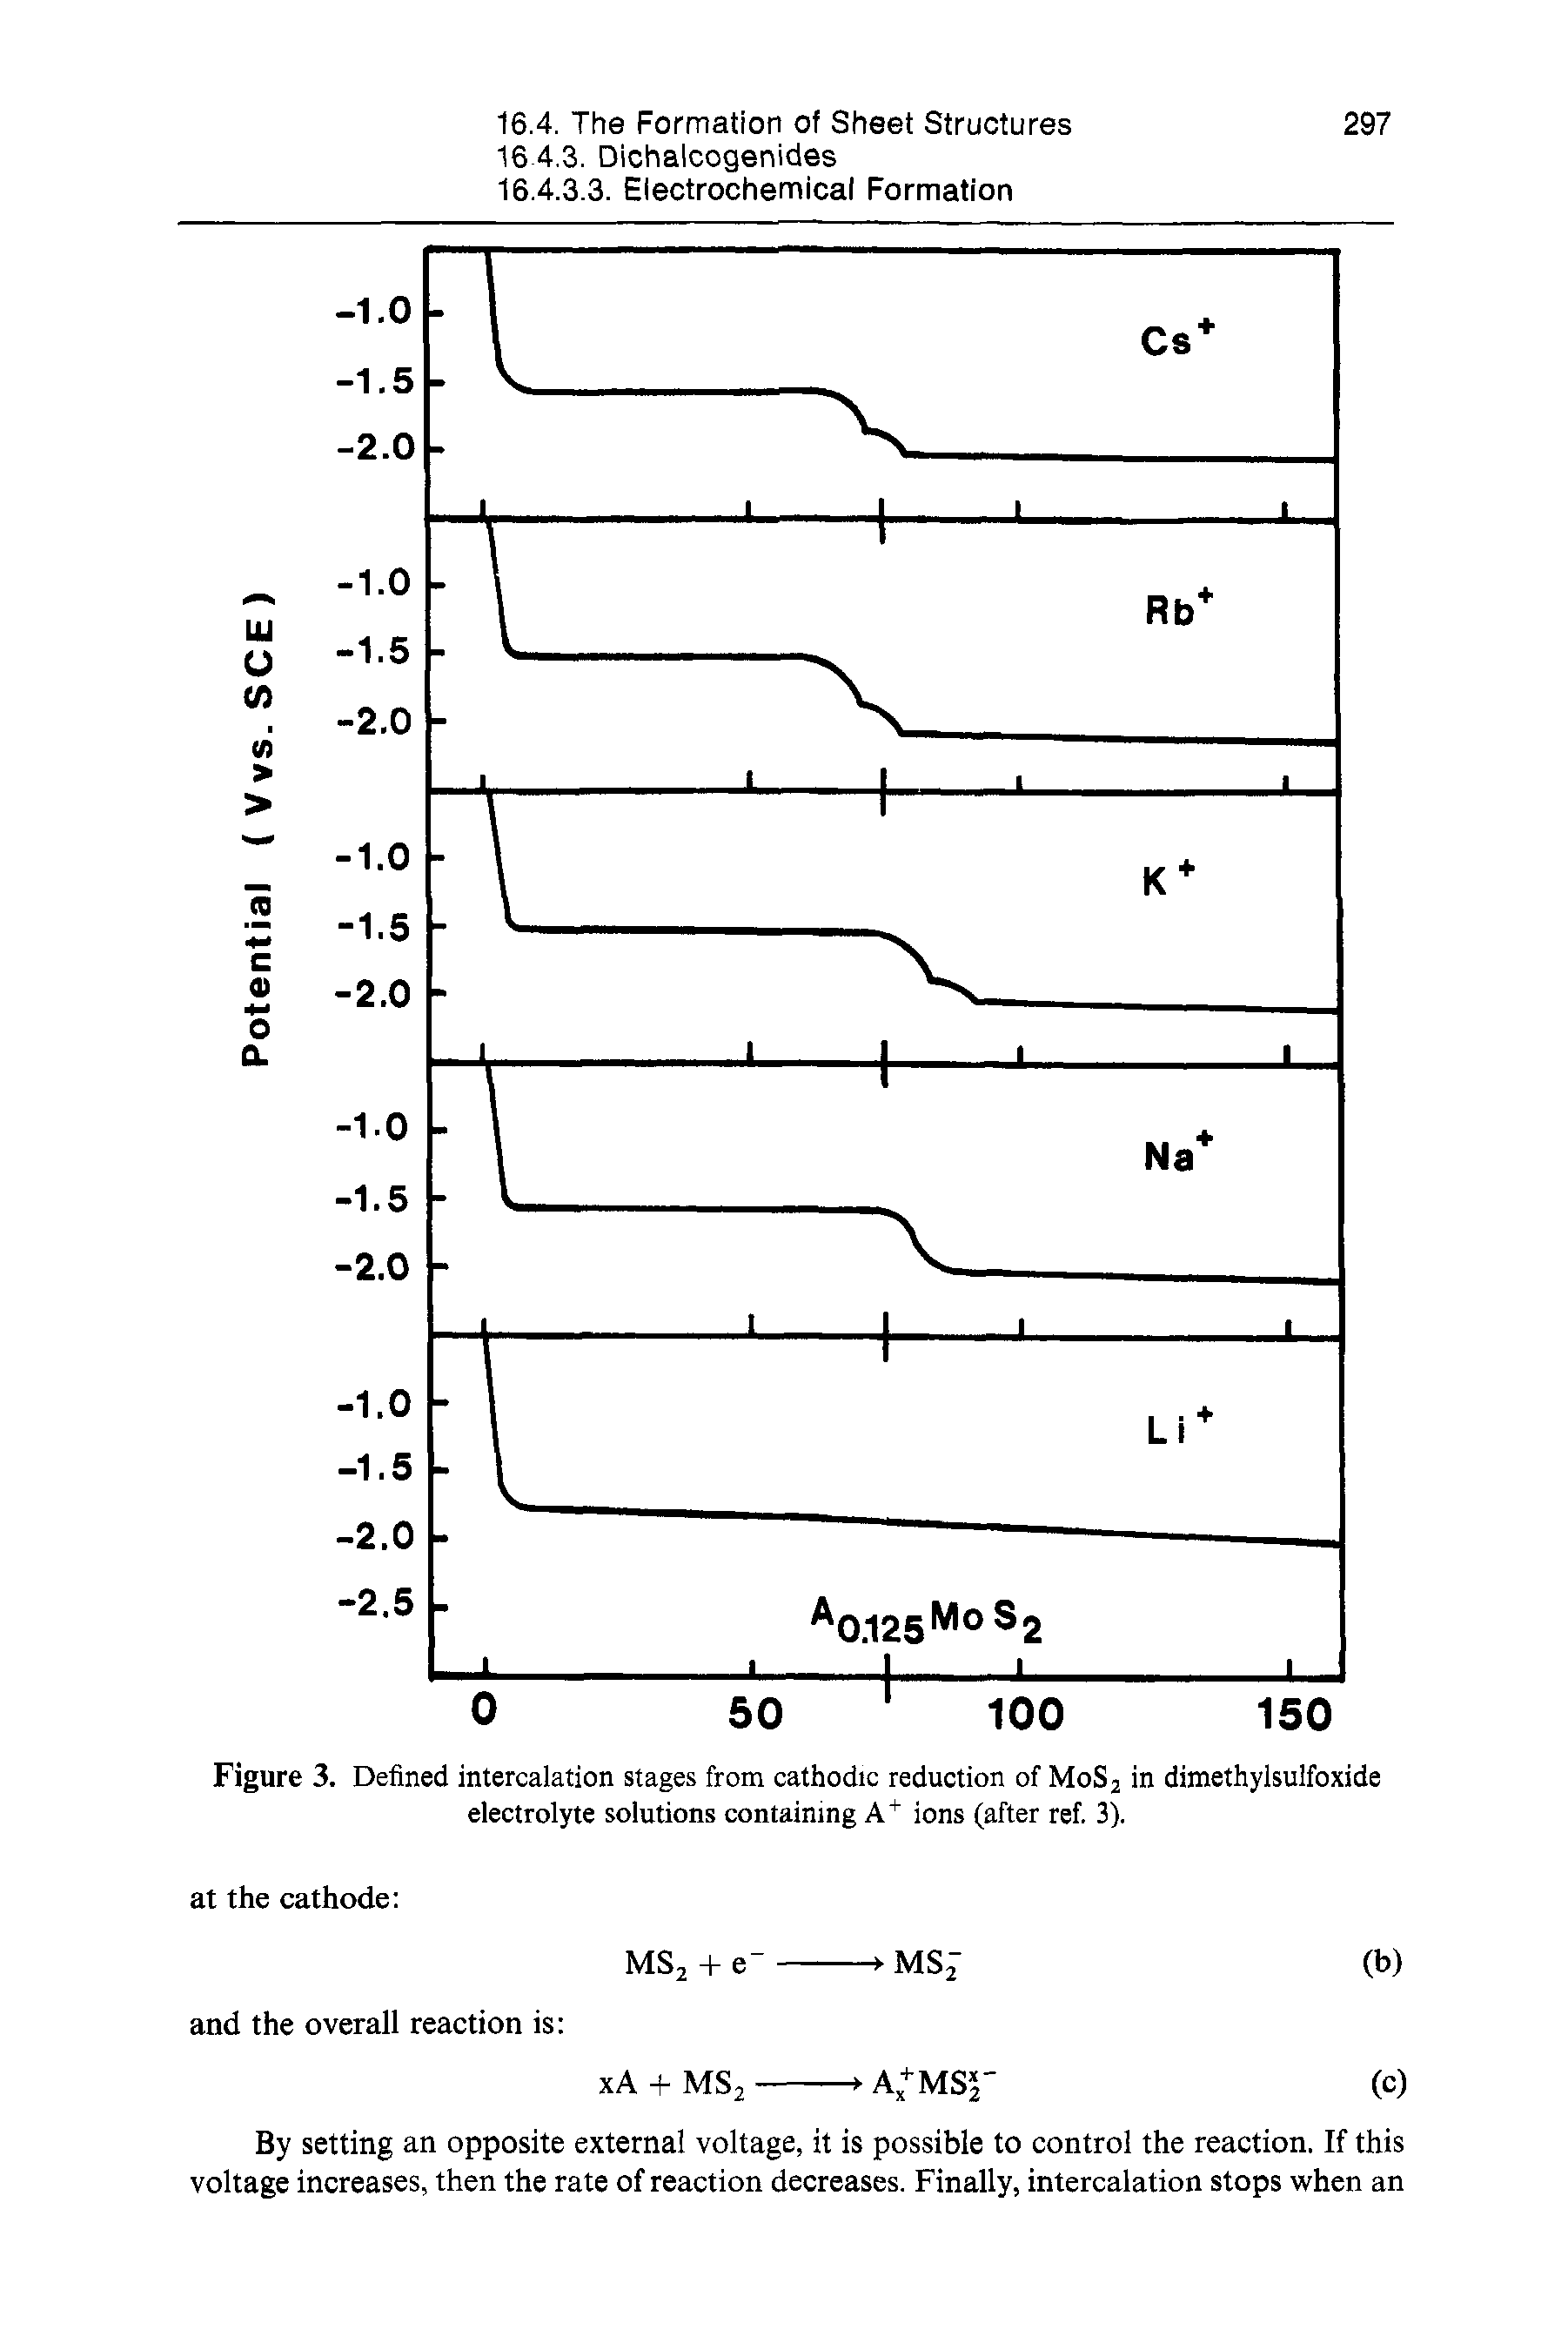 Figure 3. Defined intercalation stages from cathodic reduction of MoSj in dimethylsulfoxide electrolyte solutions containing ions (after ref. 3).